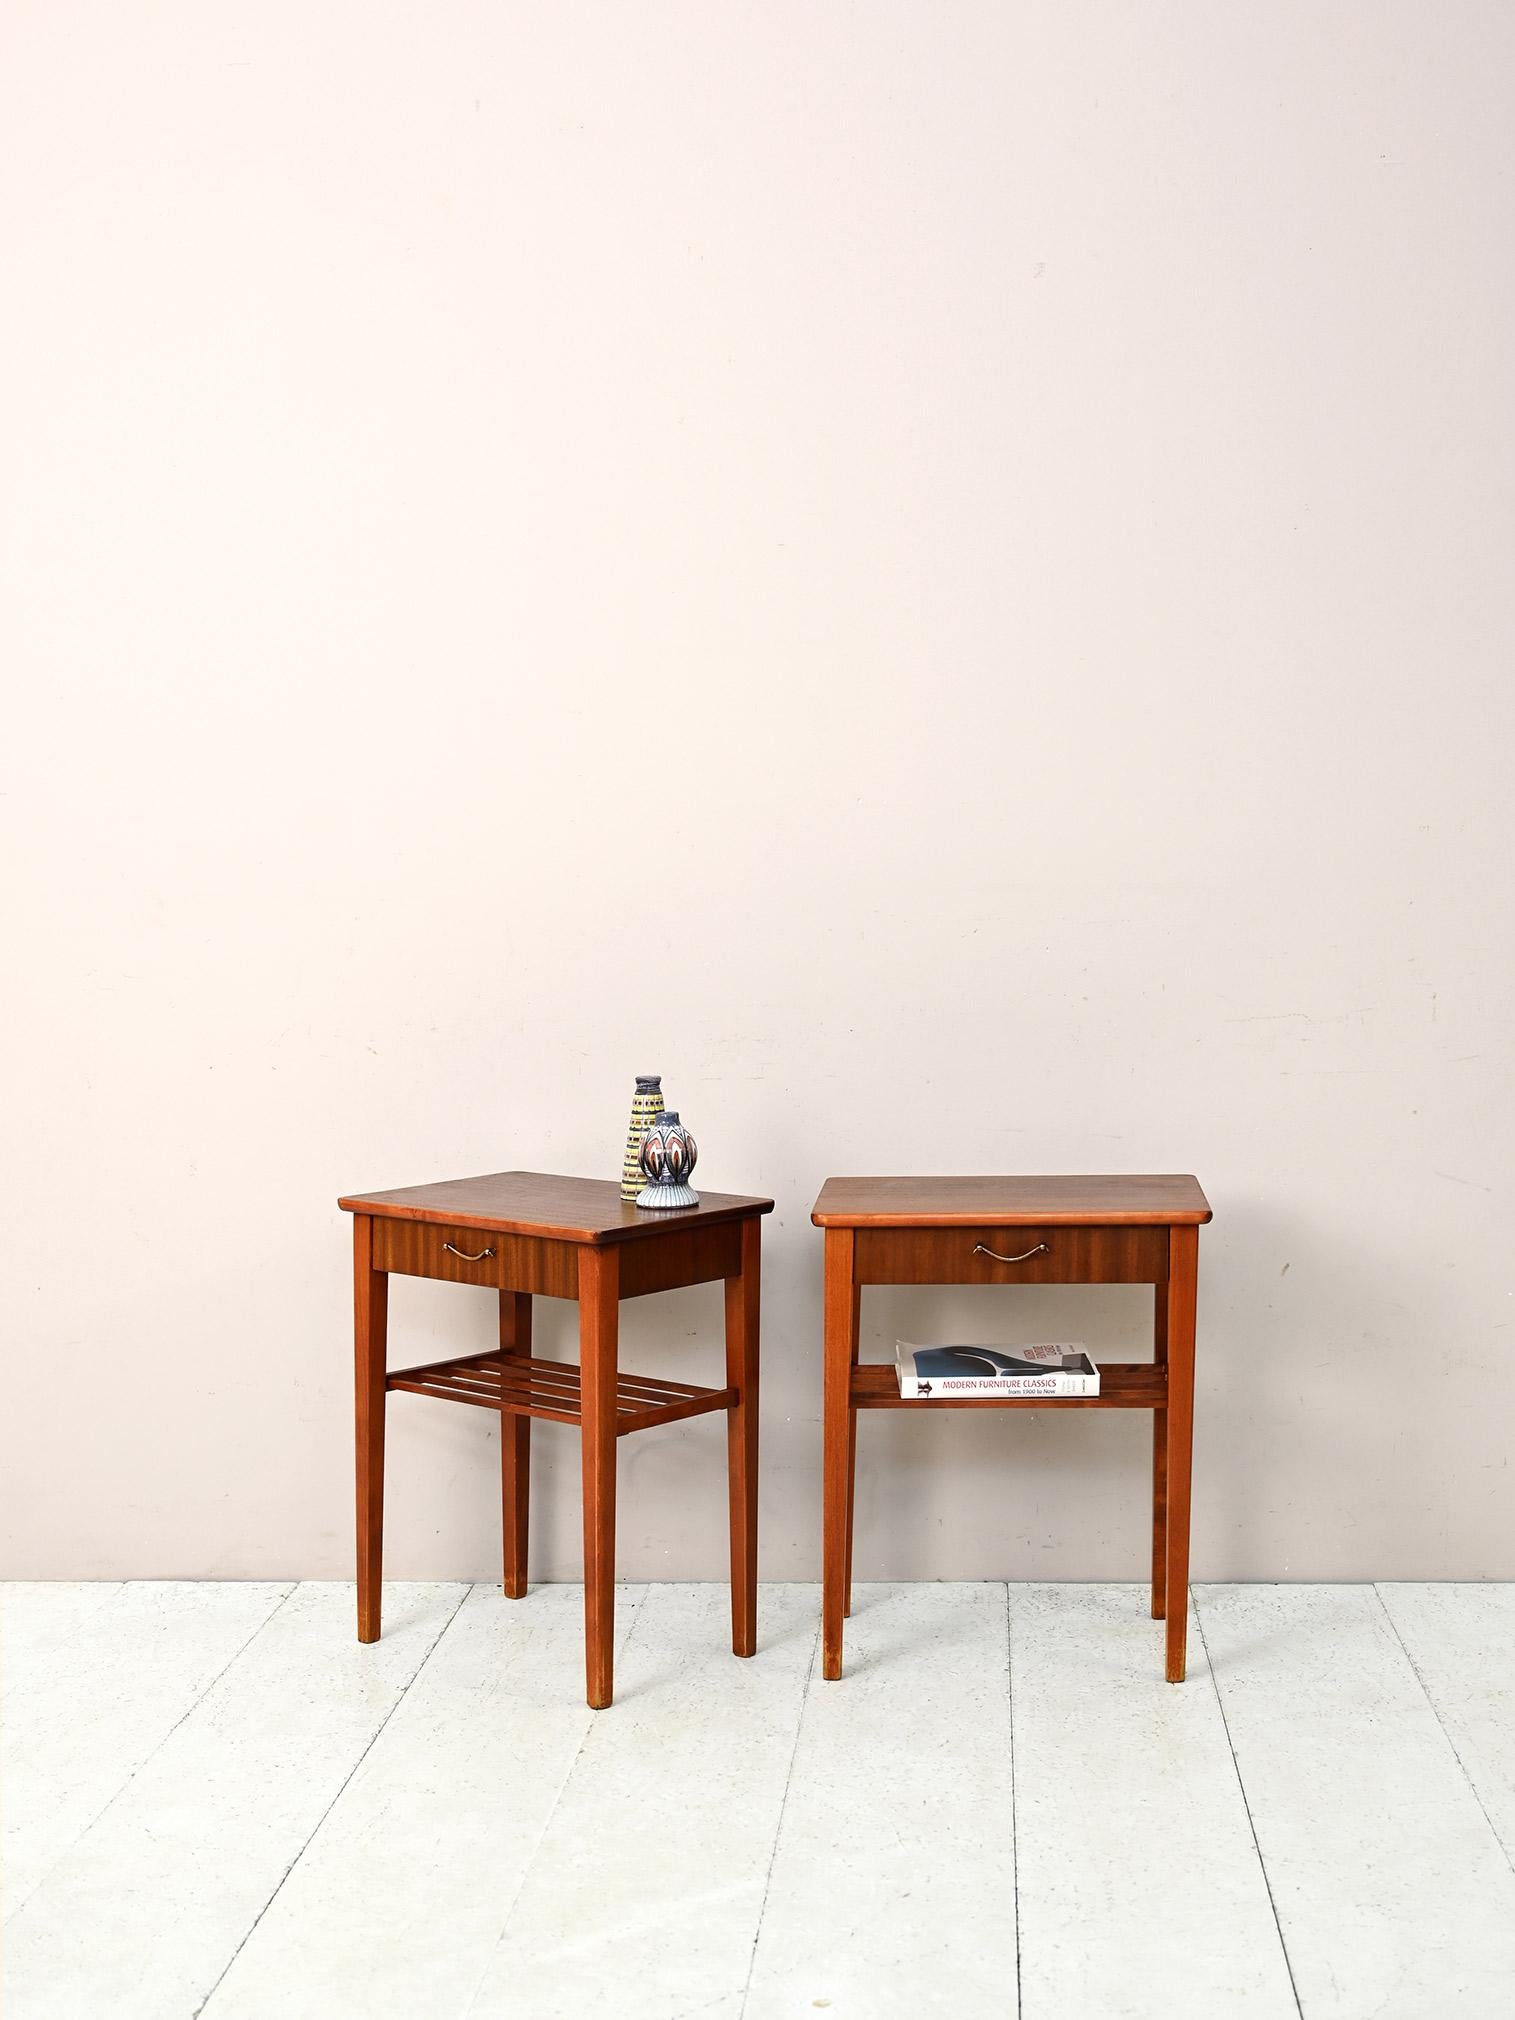 Pair of 1960s Scandinavian nightstands with drawer.

Characterized by classic lines and a retro look, they feature a magazine shelf and a drawer with a gold metal handle.
The long legs and clean lines lend modernity and elegance to the entire